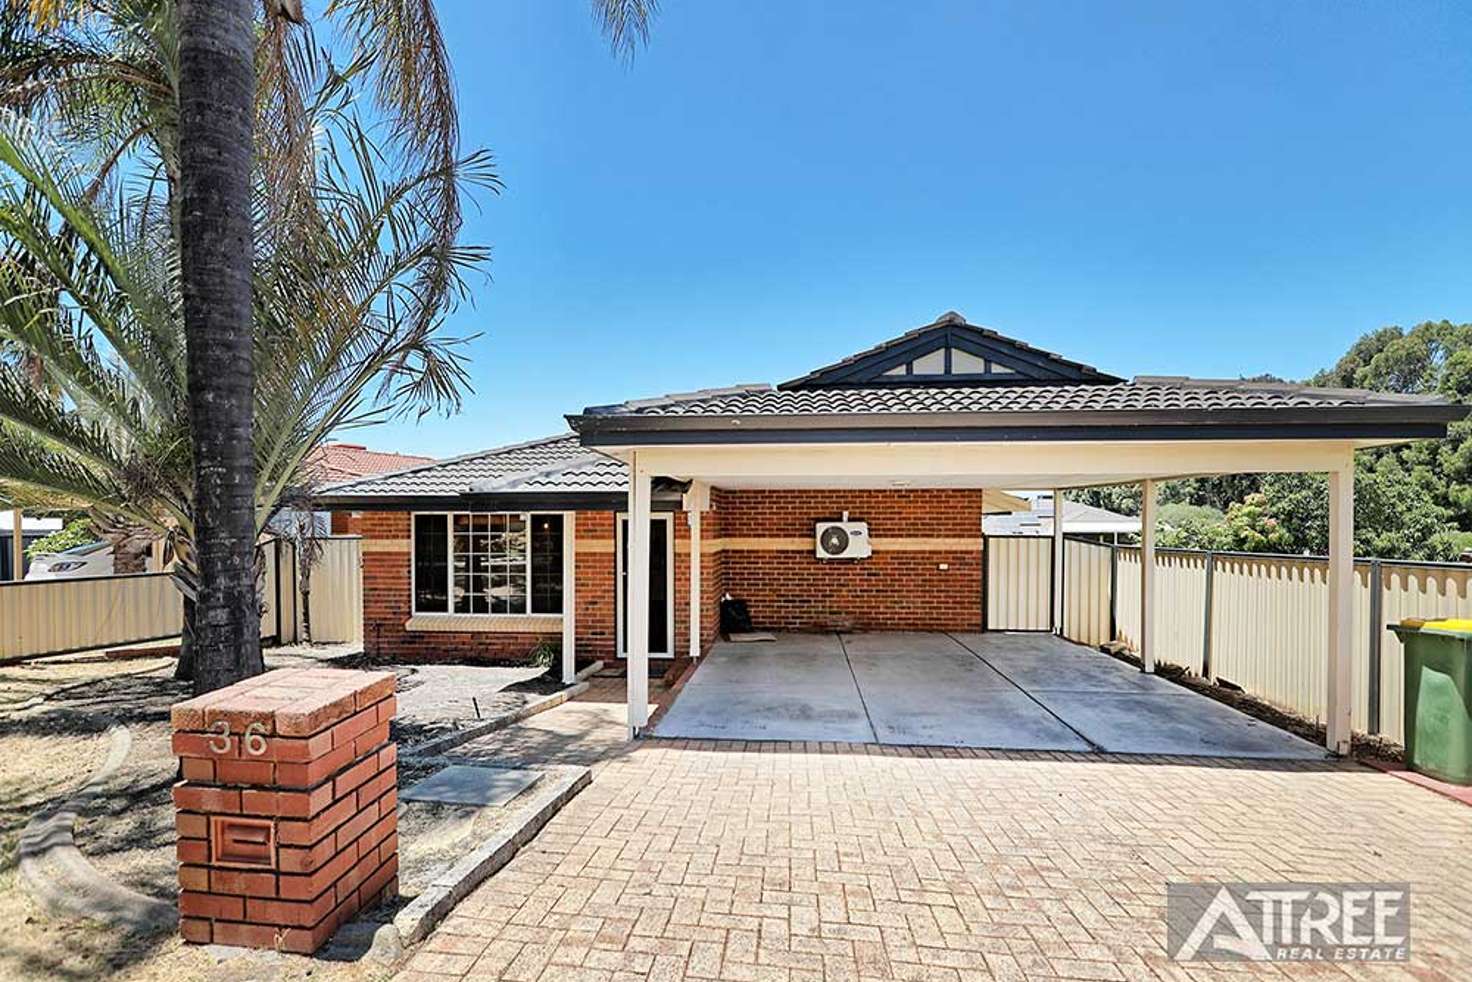 Main view of Homely house listing, 36 Treetop Circle, Canning Vale WA 6155